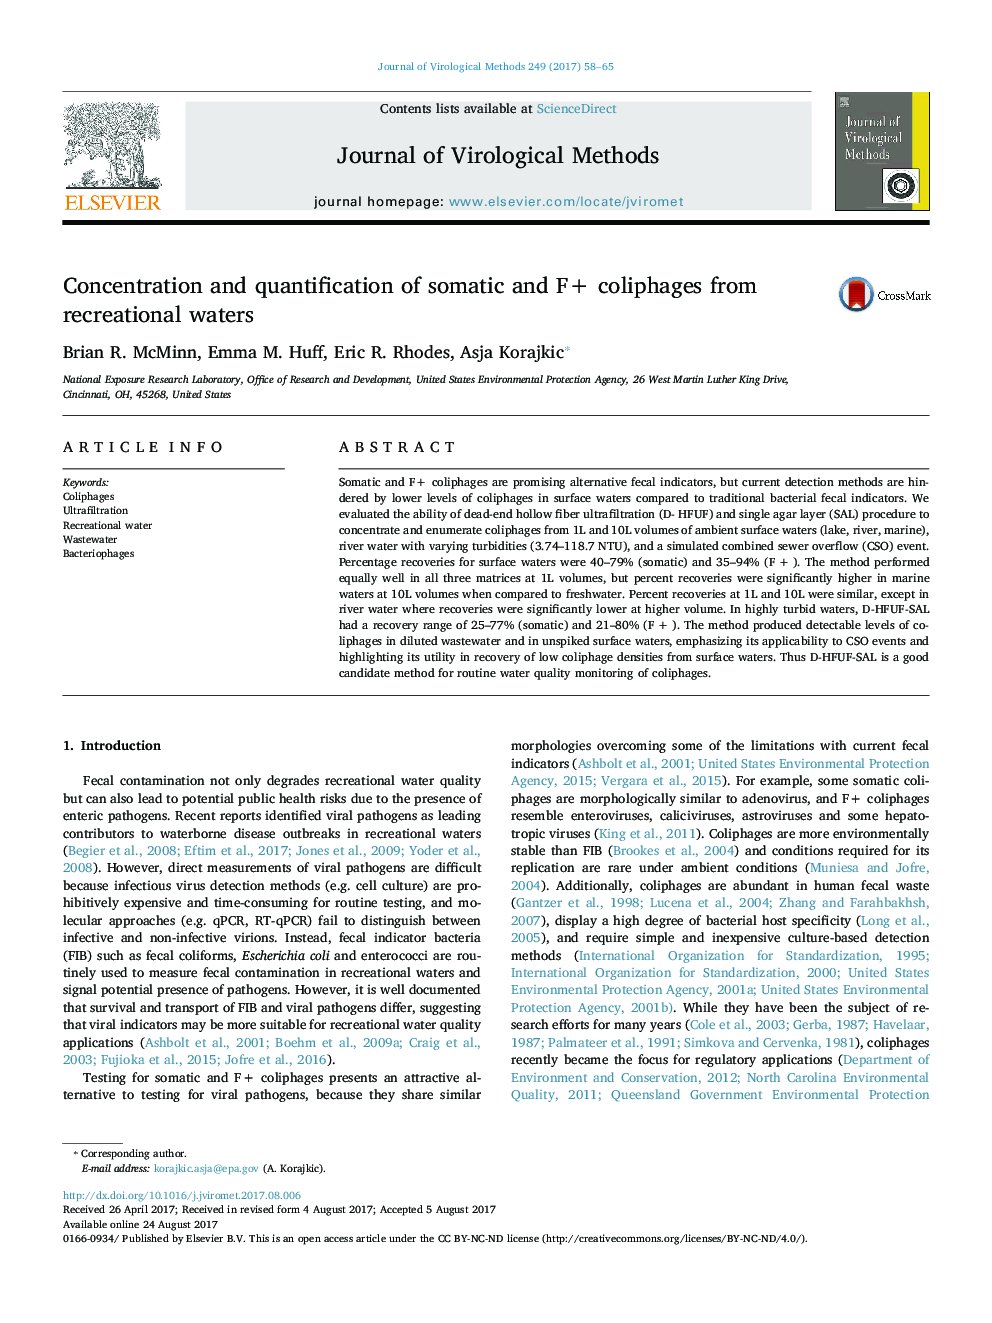 Concentration and quantification of somatic and F+ coliphages from recreational waters